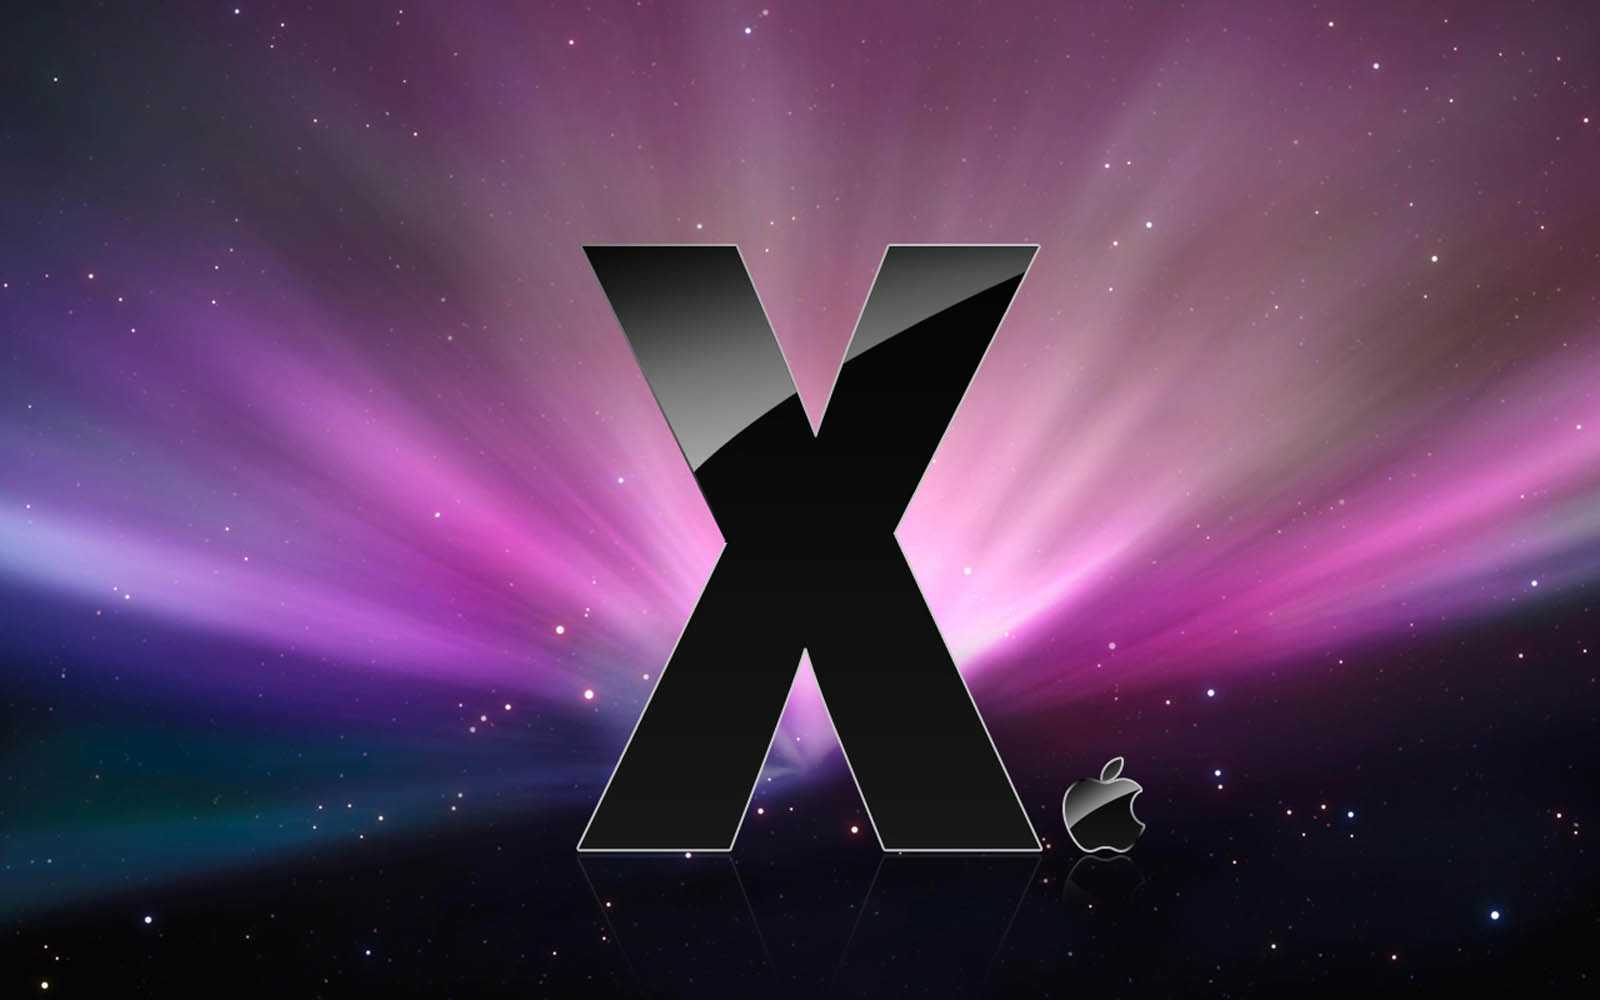  wallpapers  Mac  OS  X  Wallpapers 